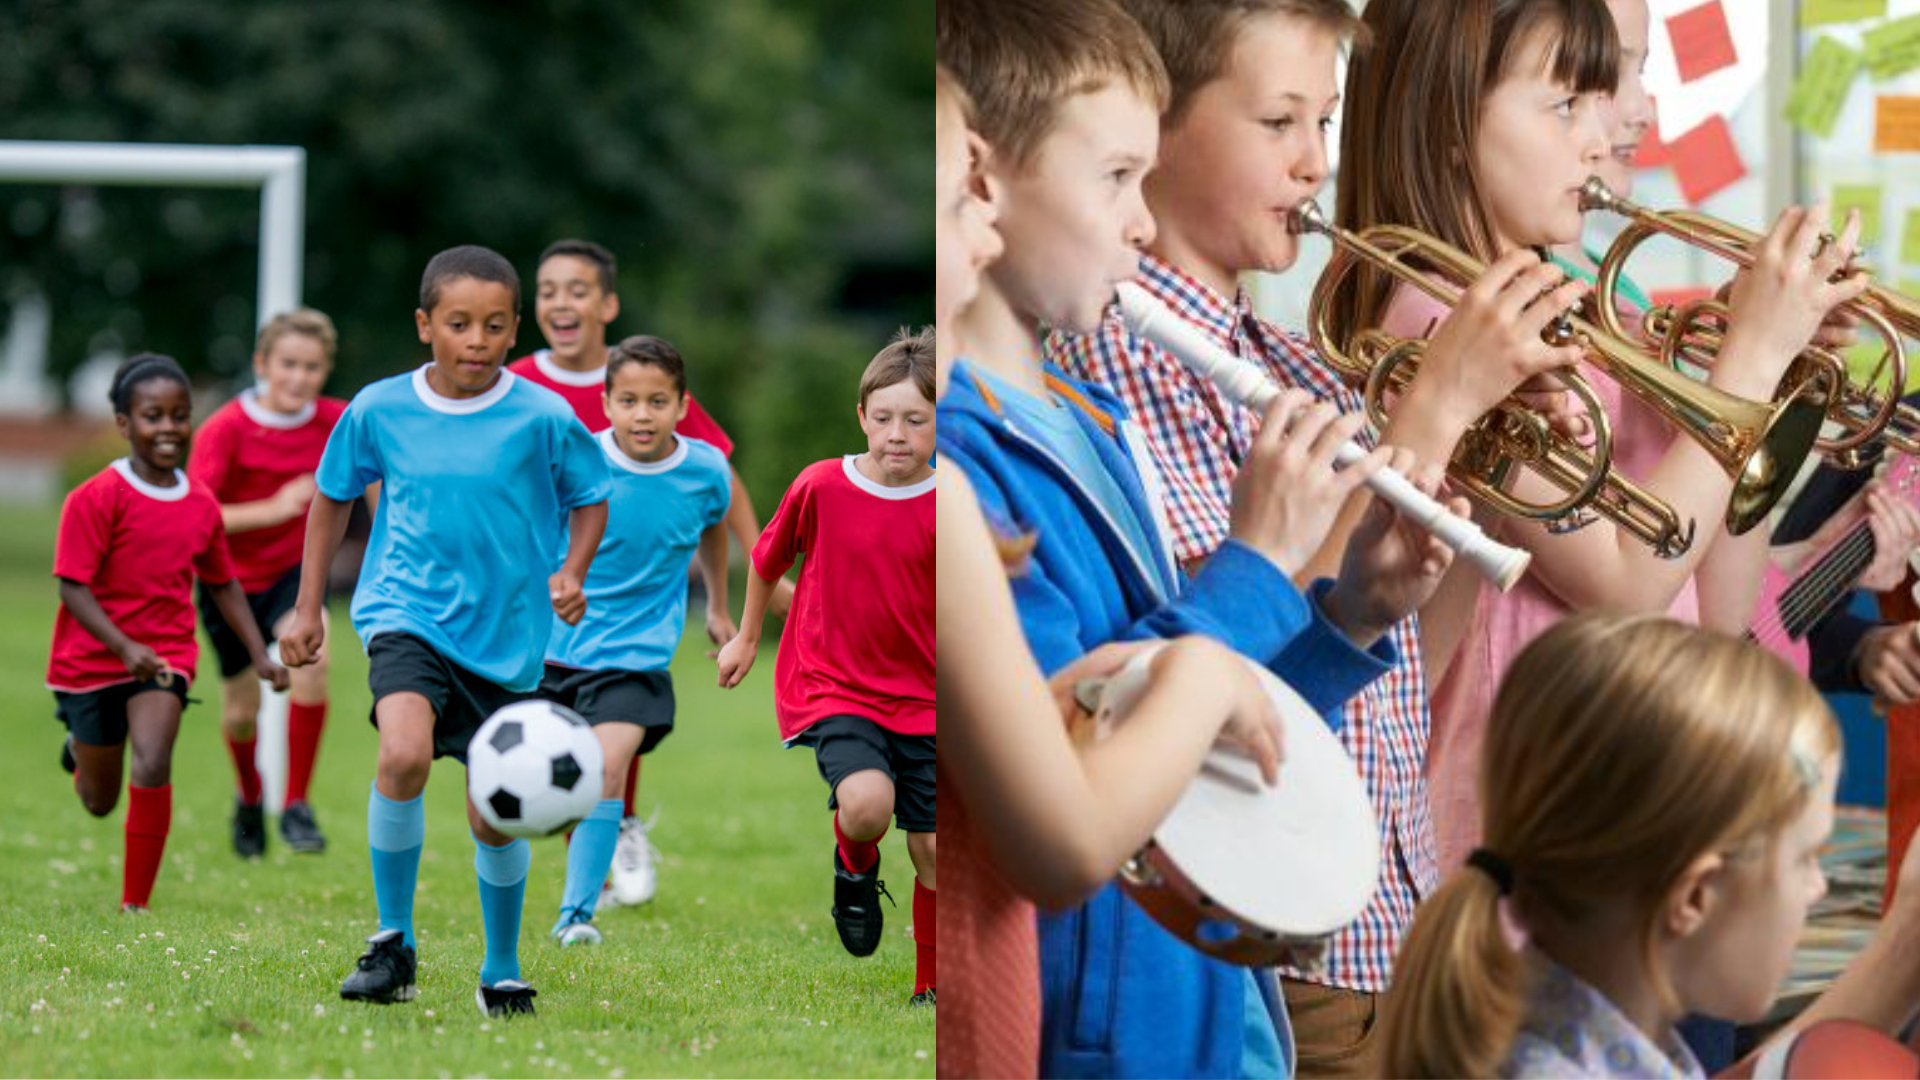 Why kids should get involved in extracurricular activities